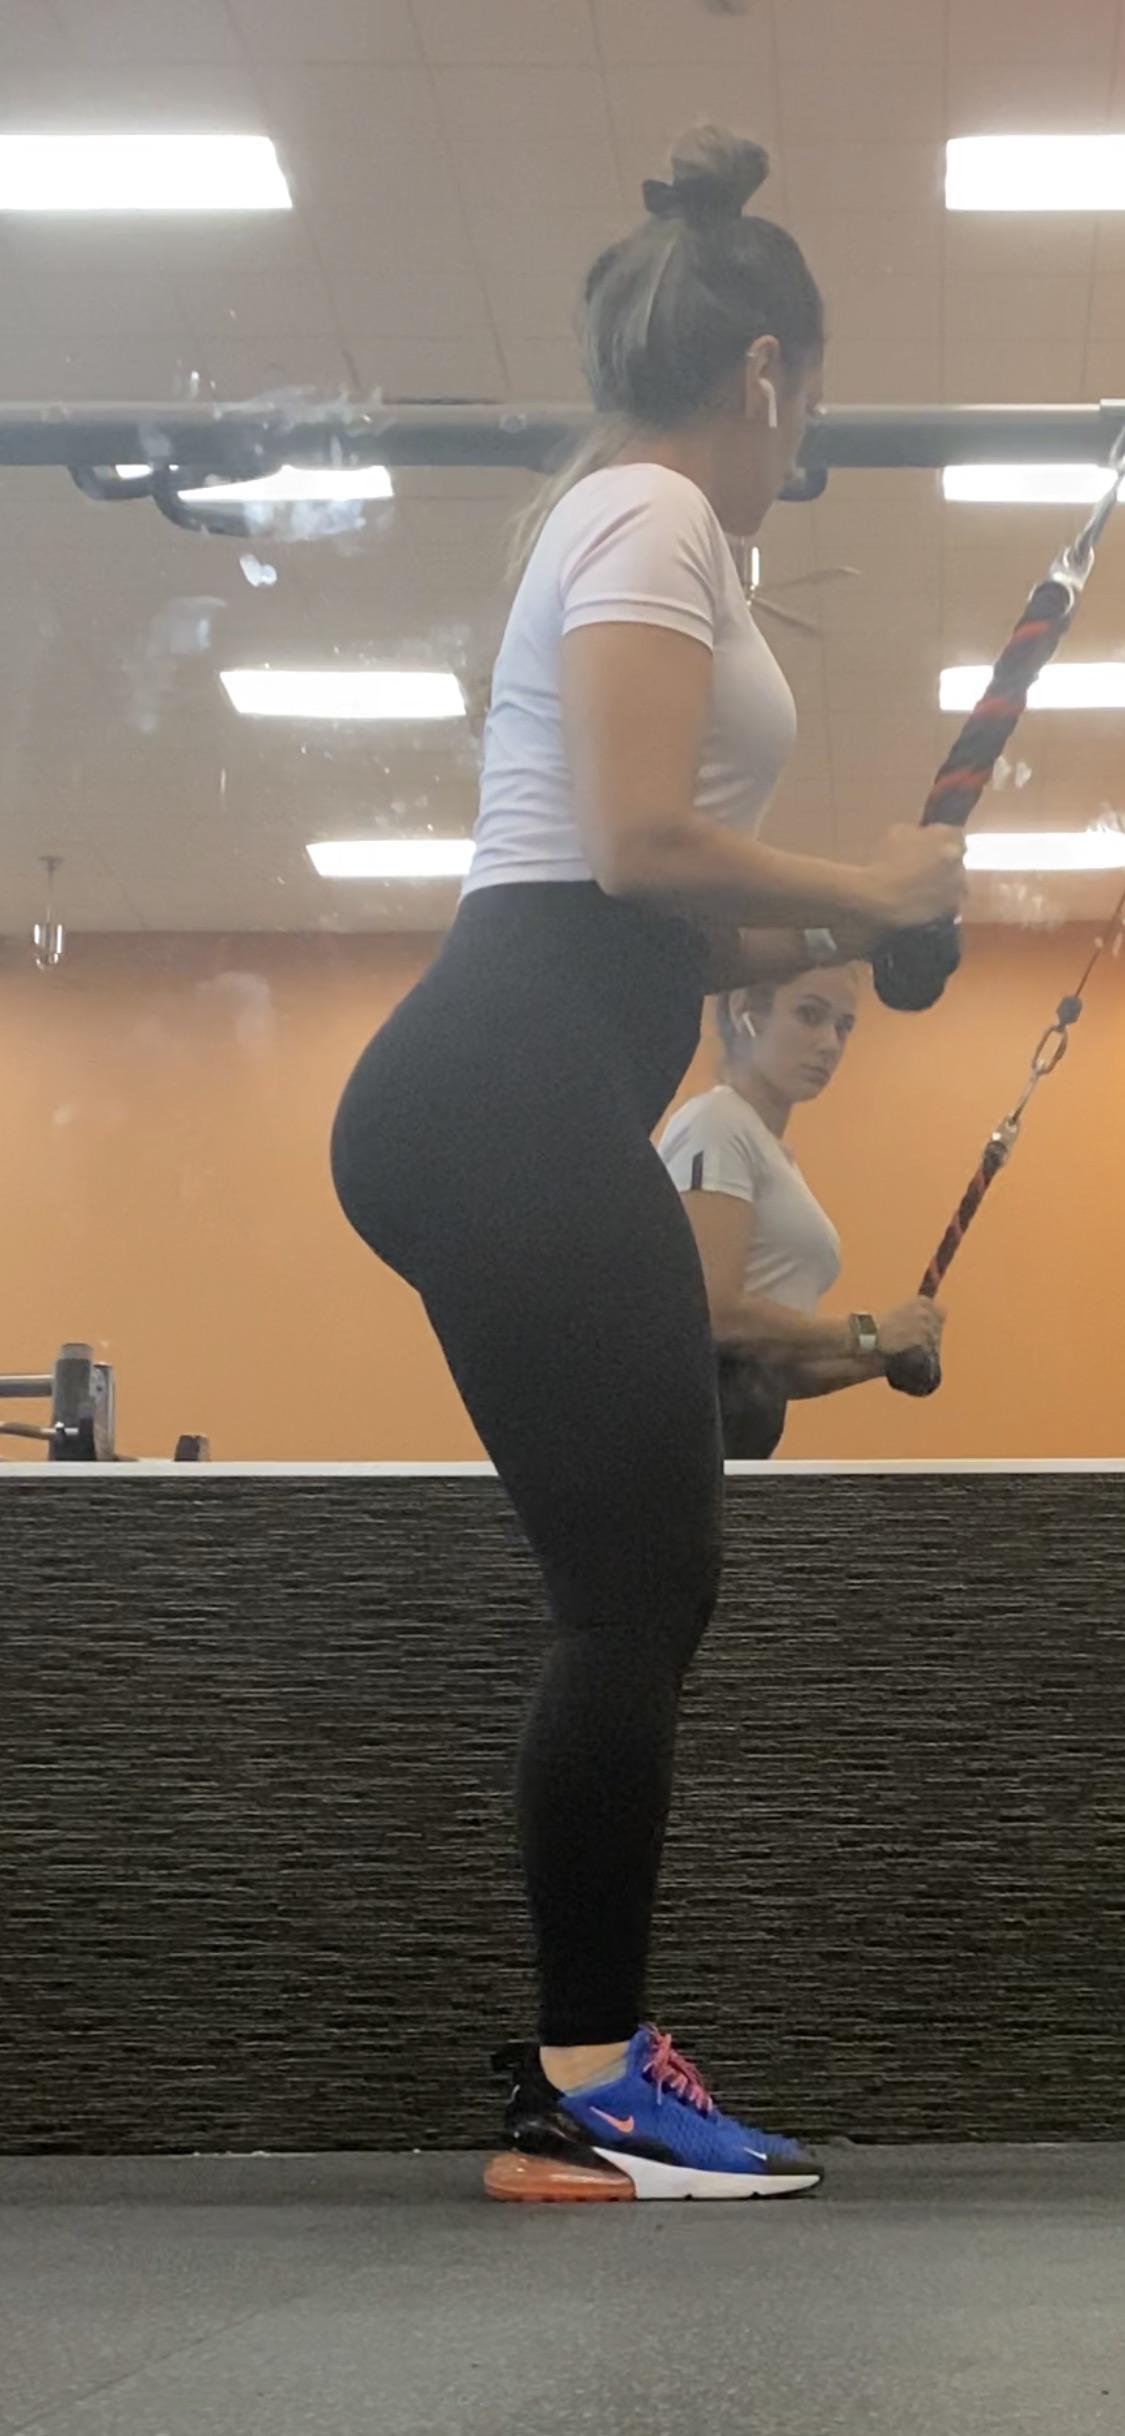 Sending Candid Videos Of Big Booty Girls Working Out At My Gym Kik Me